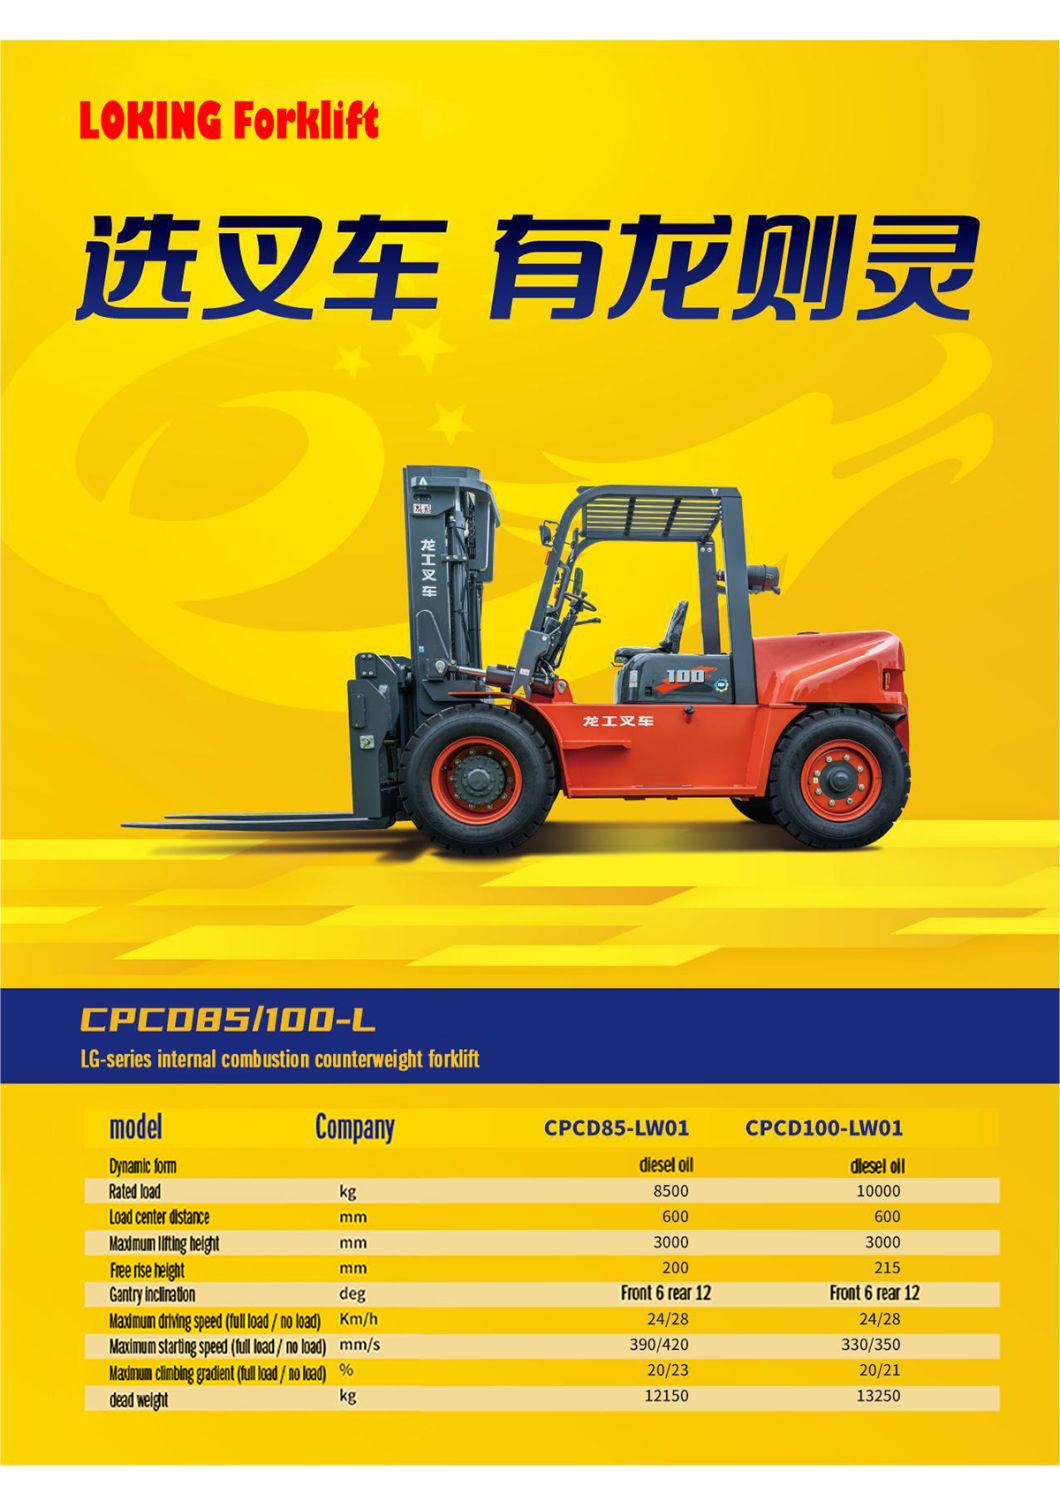 Diesel Forklift 8 Ton 15ton Heavy Duty Diesel Forklift with CE Approved